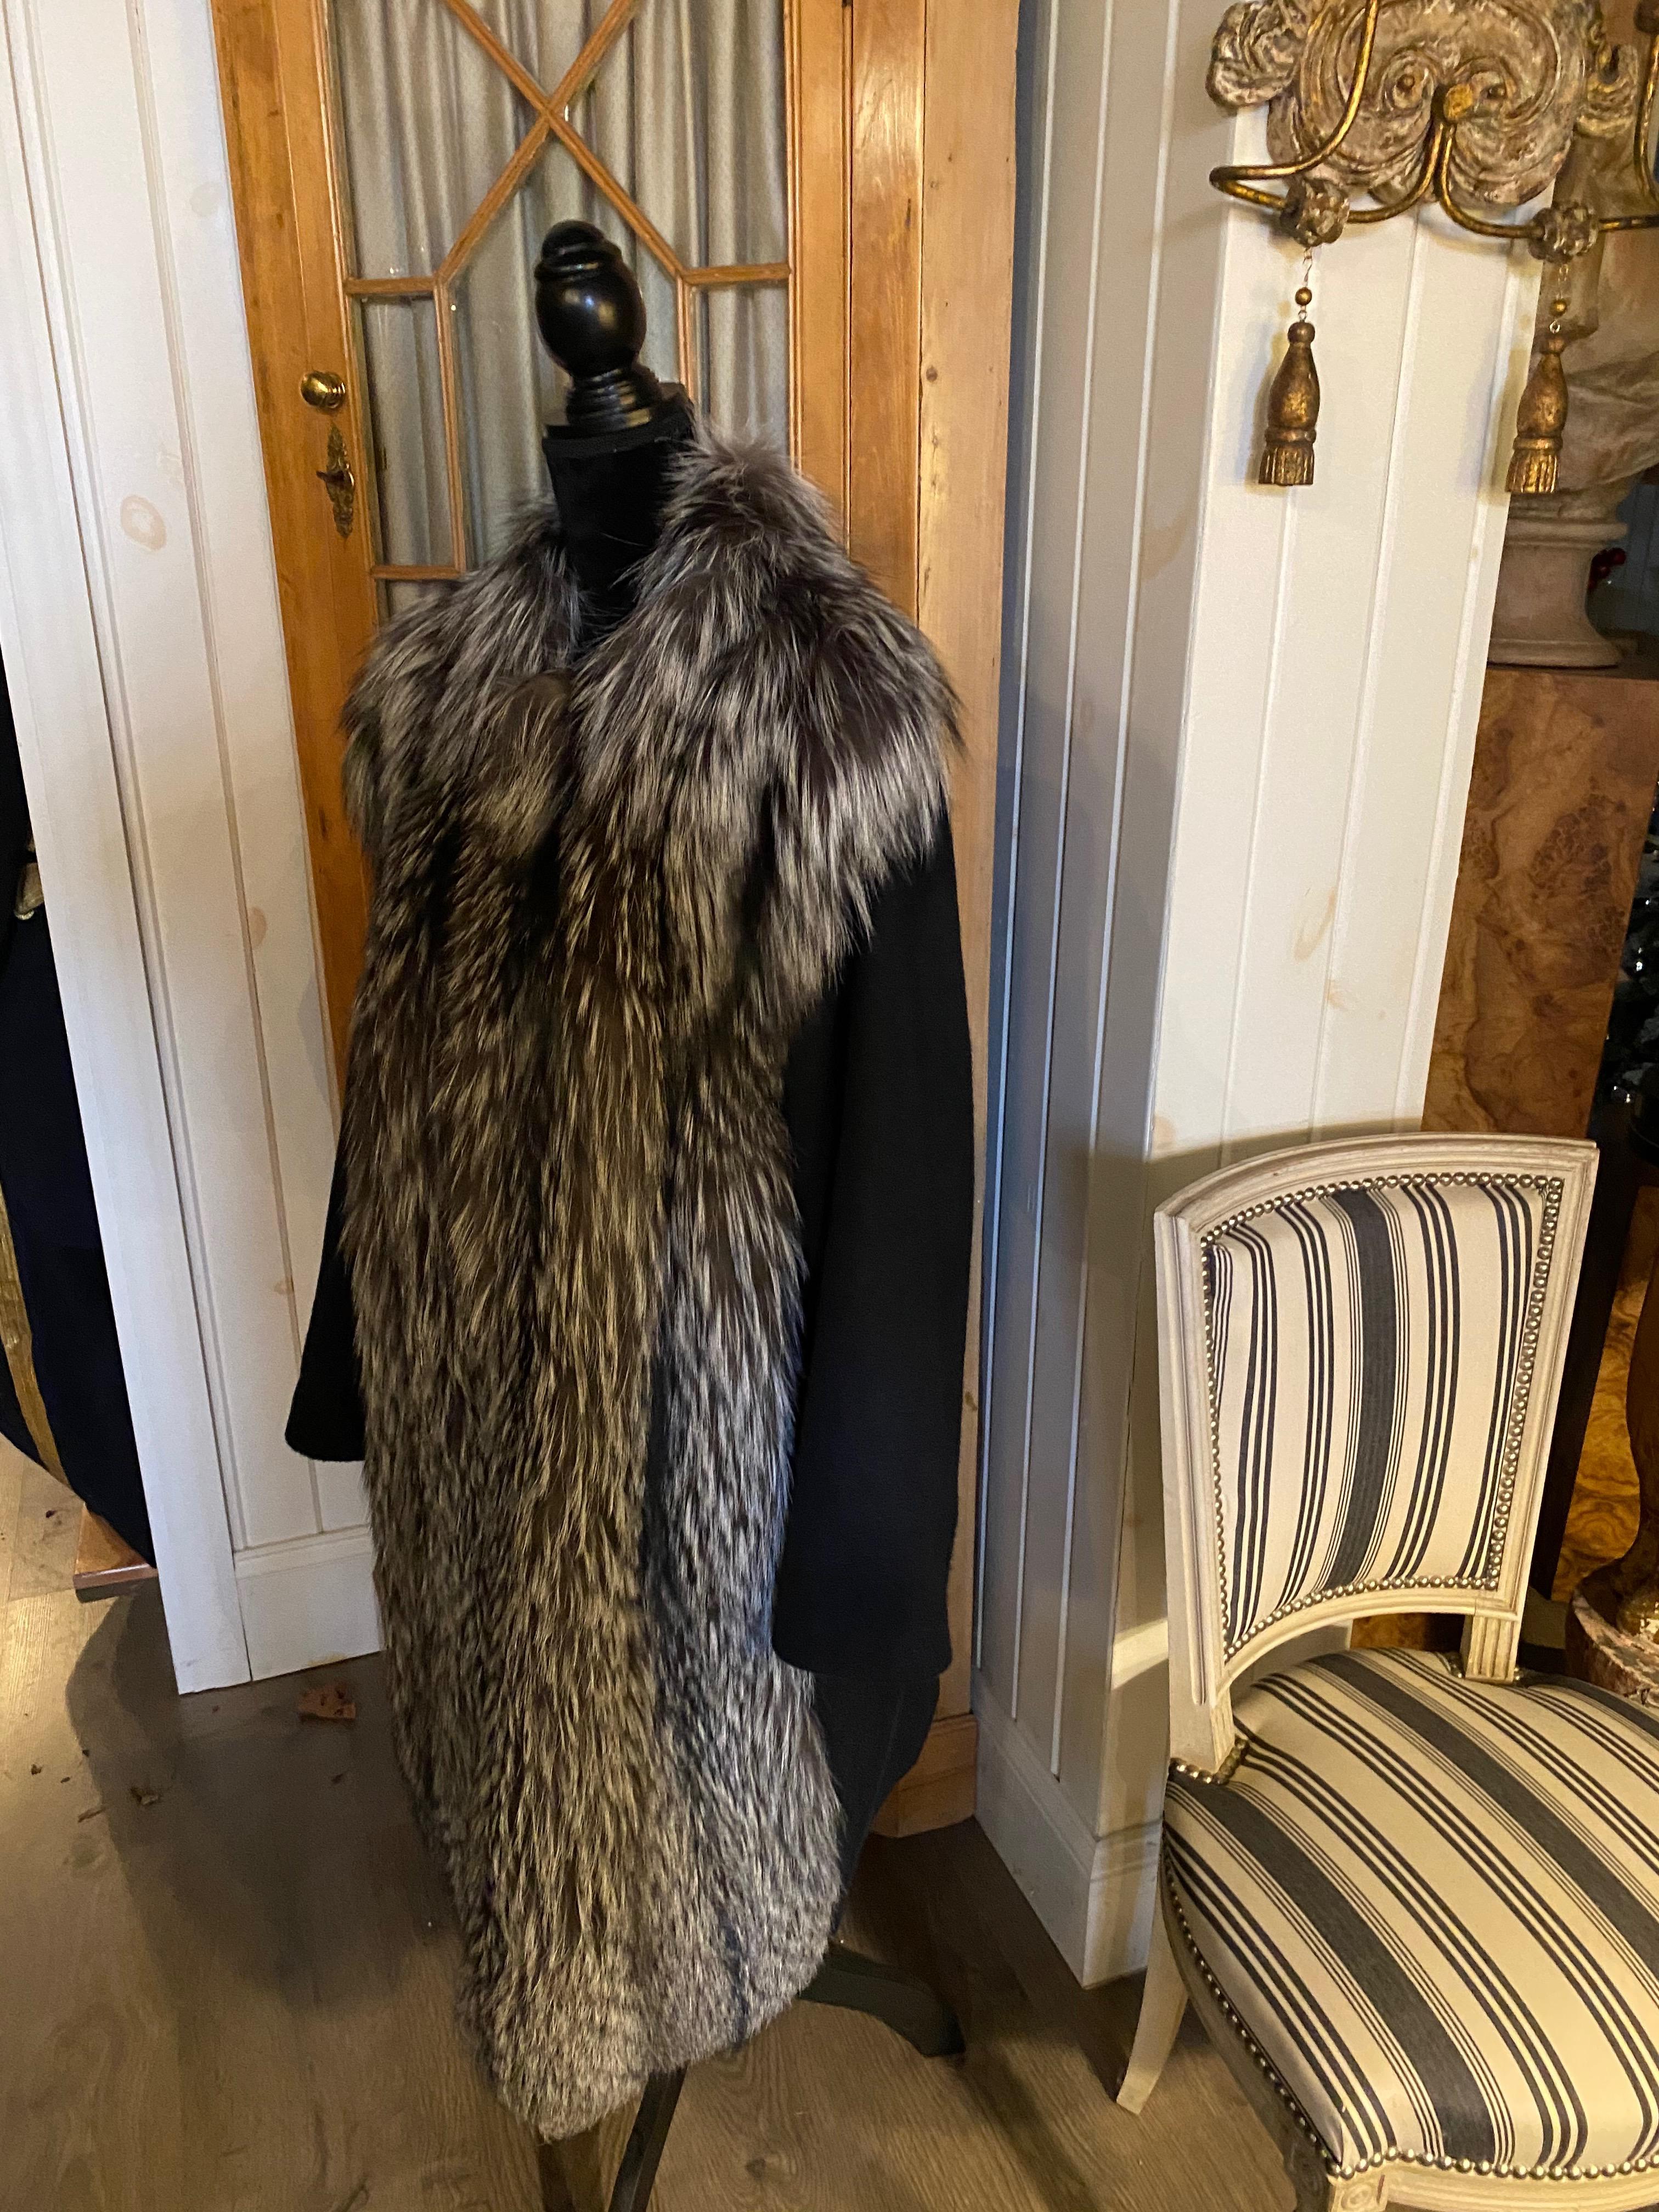 A Giuliana Teso Cashmere And Fox Coat, 3/4 Length.  Very High Grade Cashmere. 4-5 ply.
3/4 length collarless black cashmere coat with silver fox front
Size 14